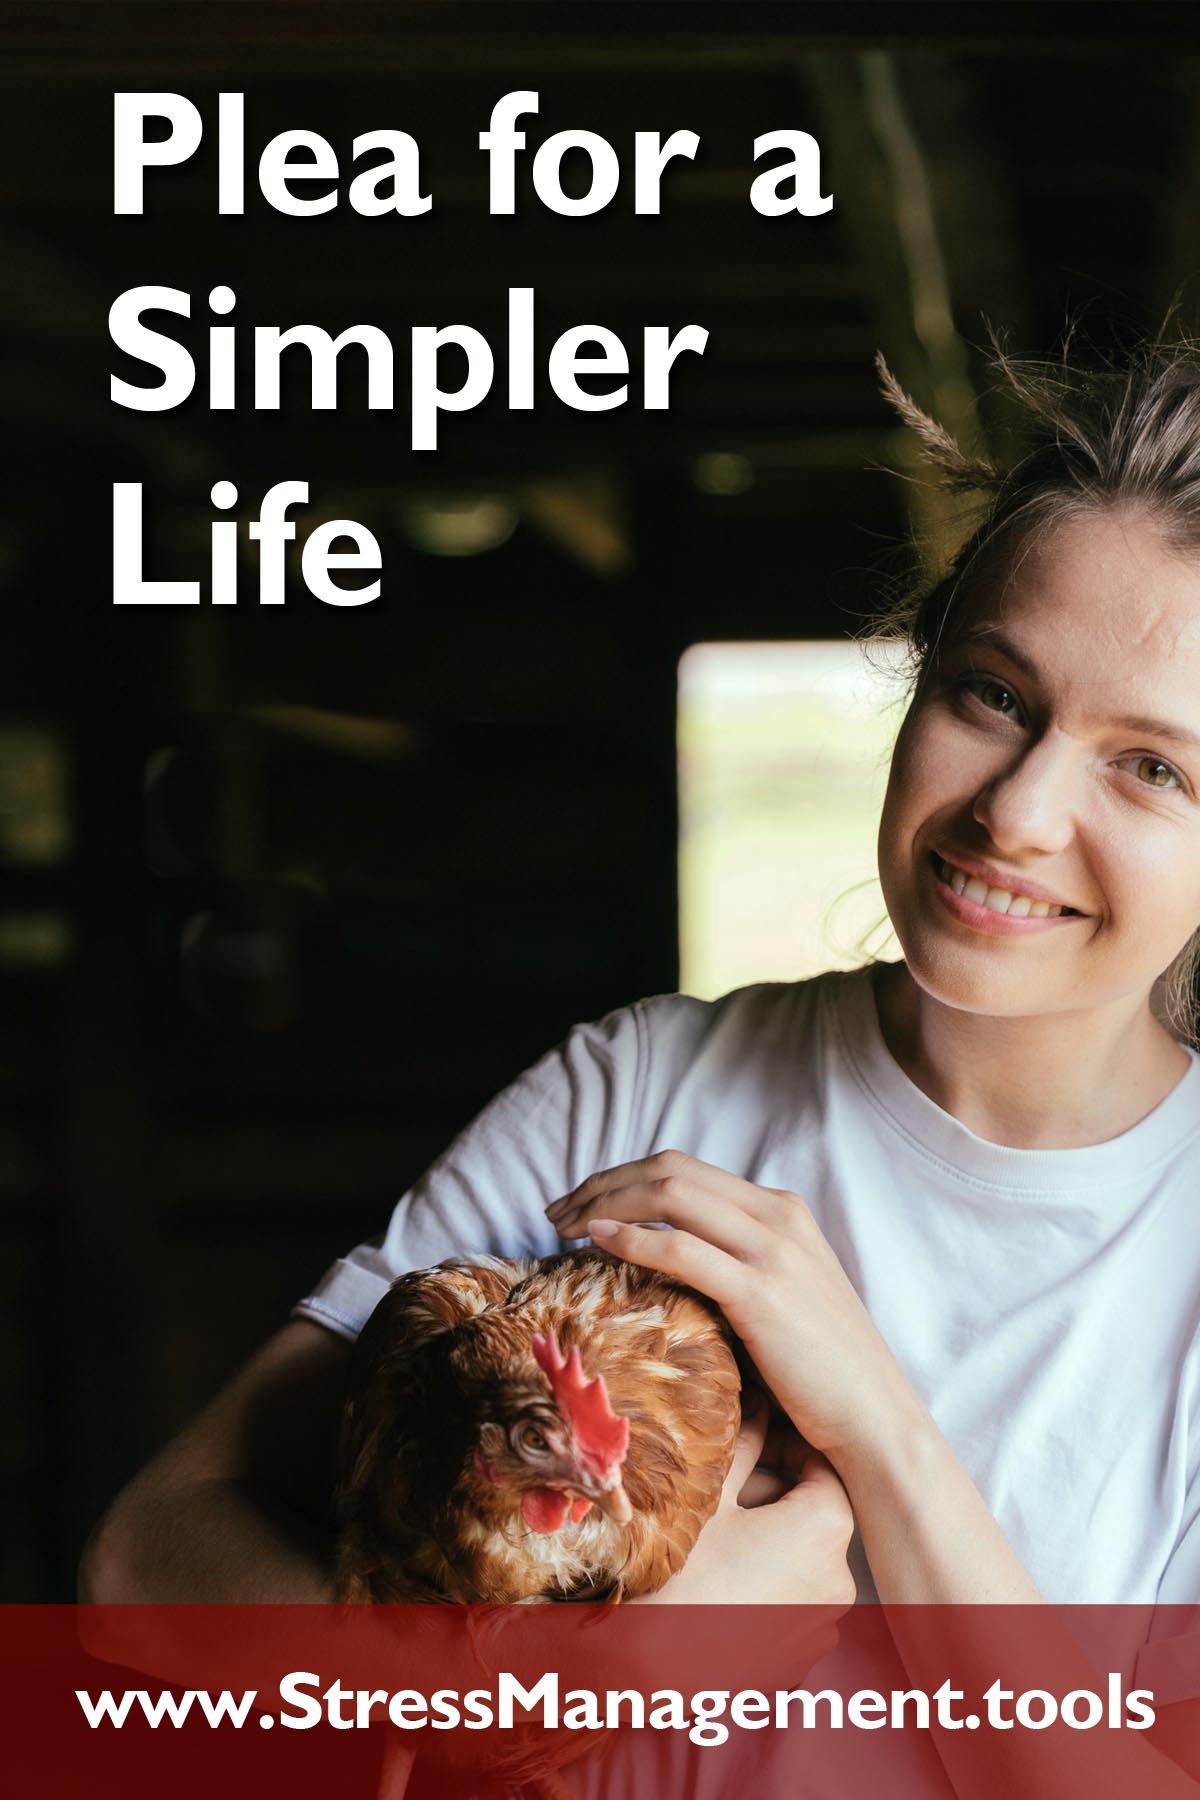 Plea for a Simpler Life – Less is More